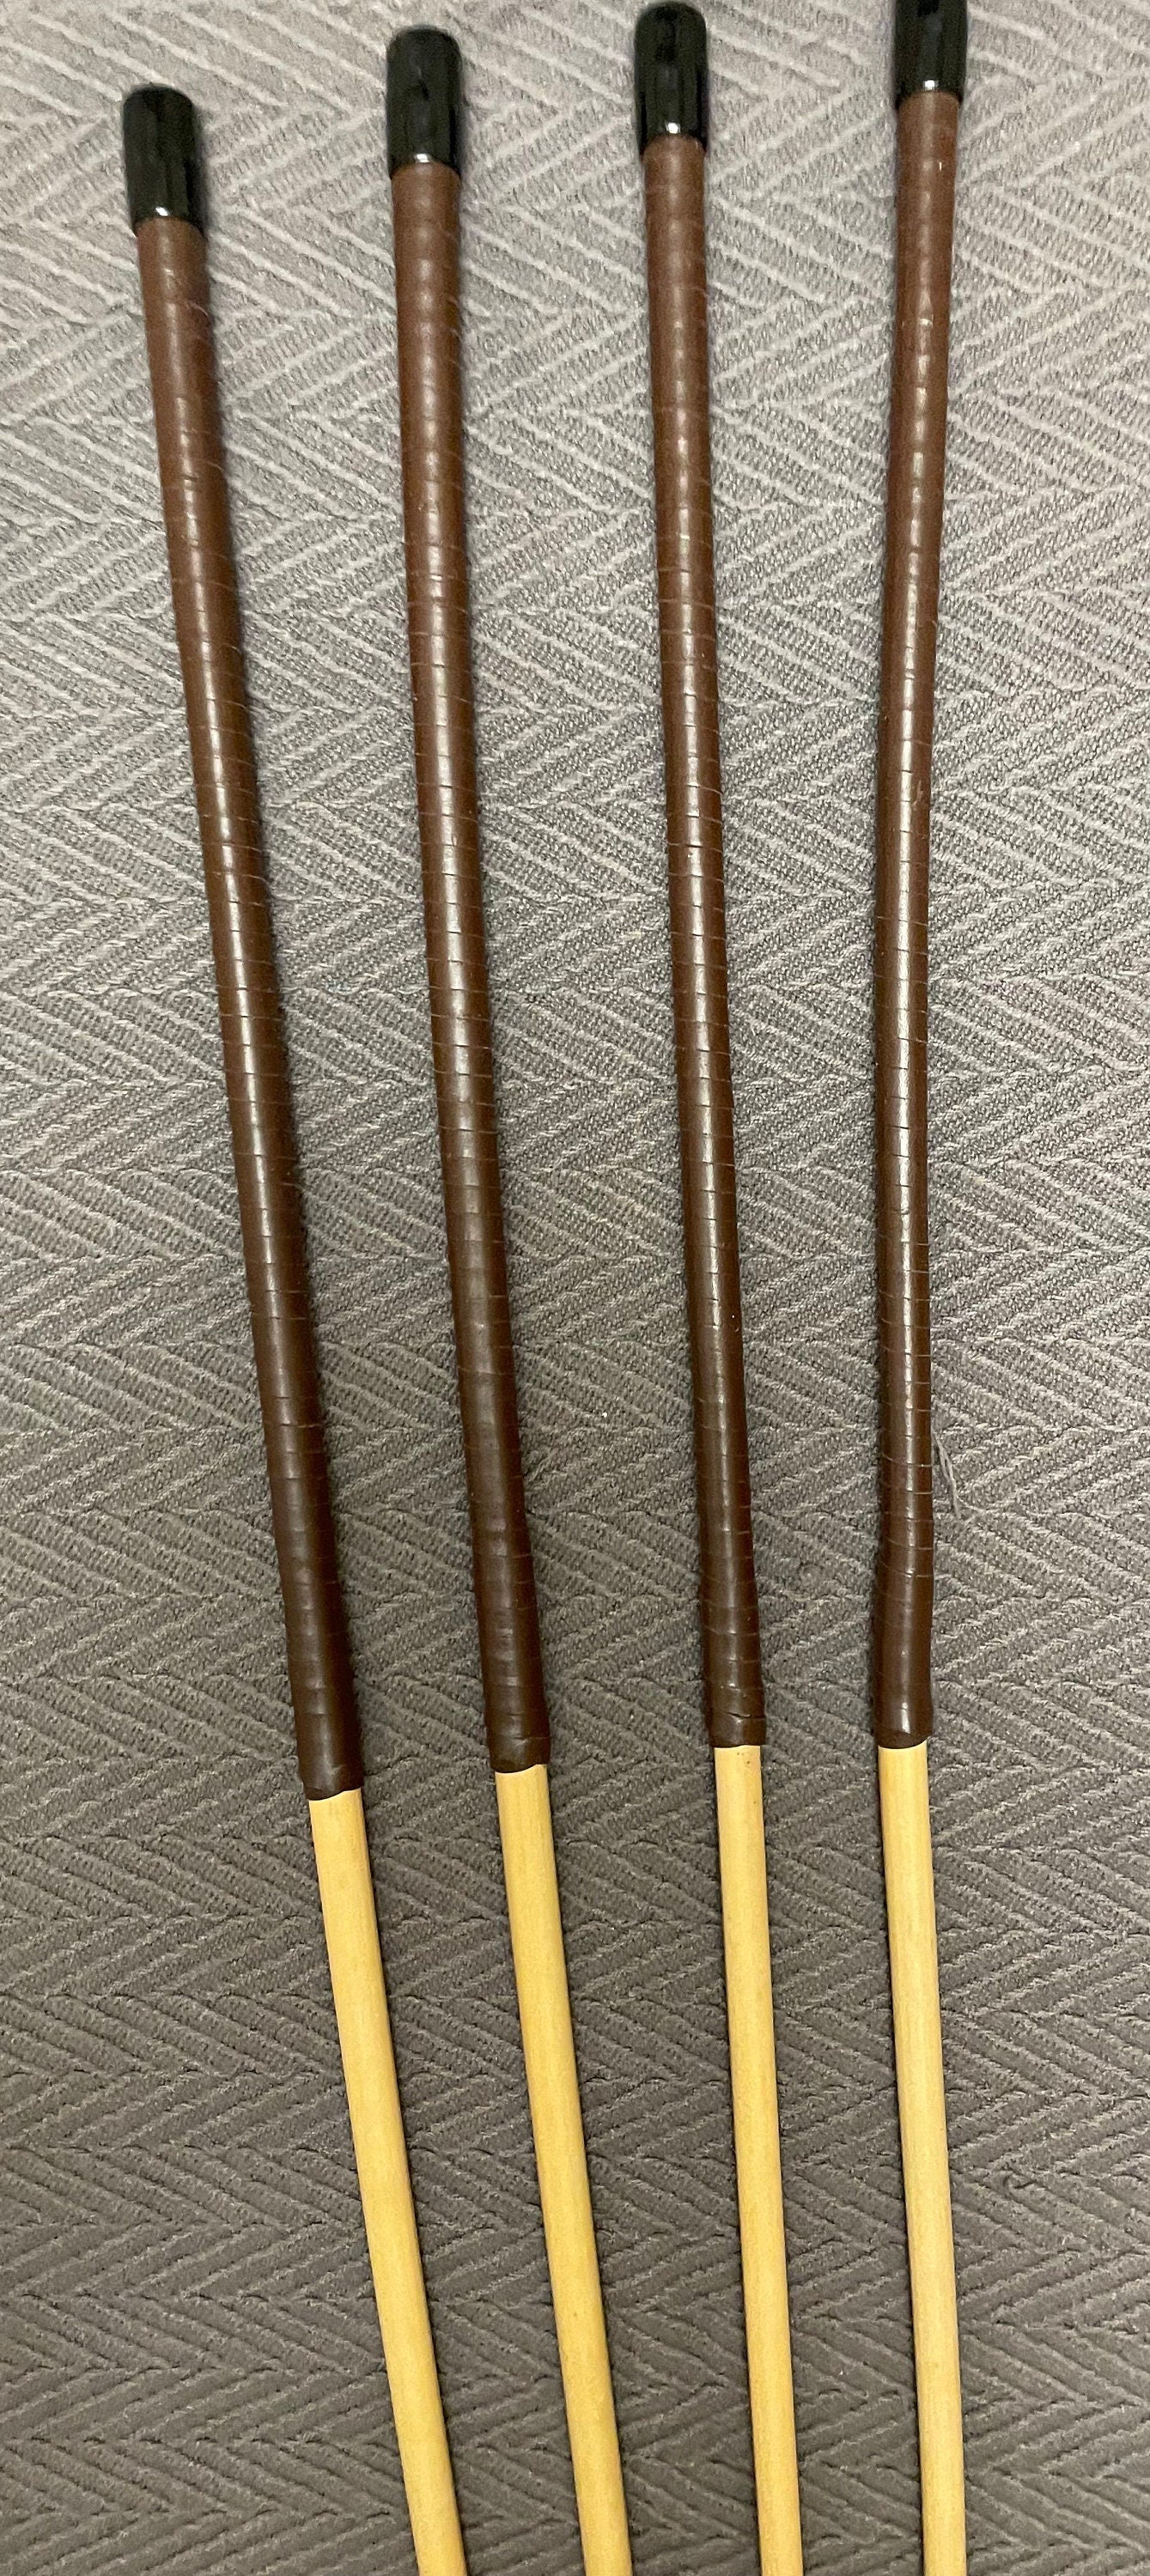 Knotless Dragon Canes / Ultimate Rattan Canes Set of 4 with Brandy Kangaroo Leather Handles 100 cms Length - Englishvice Canes